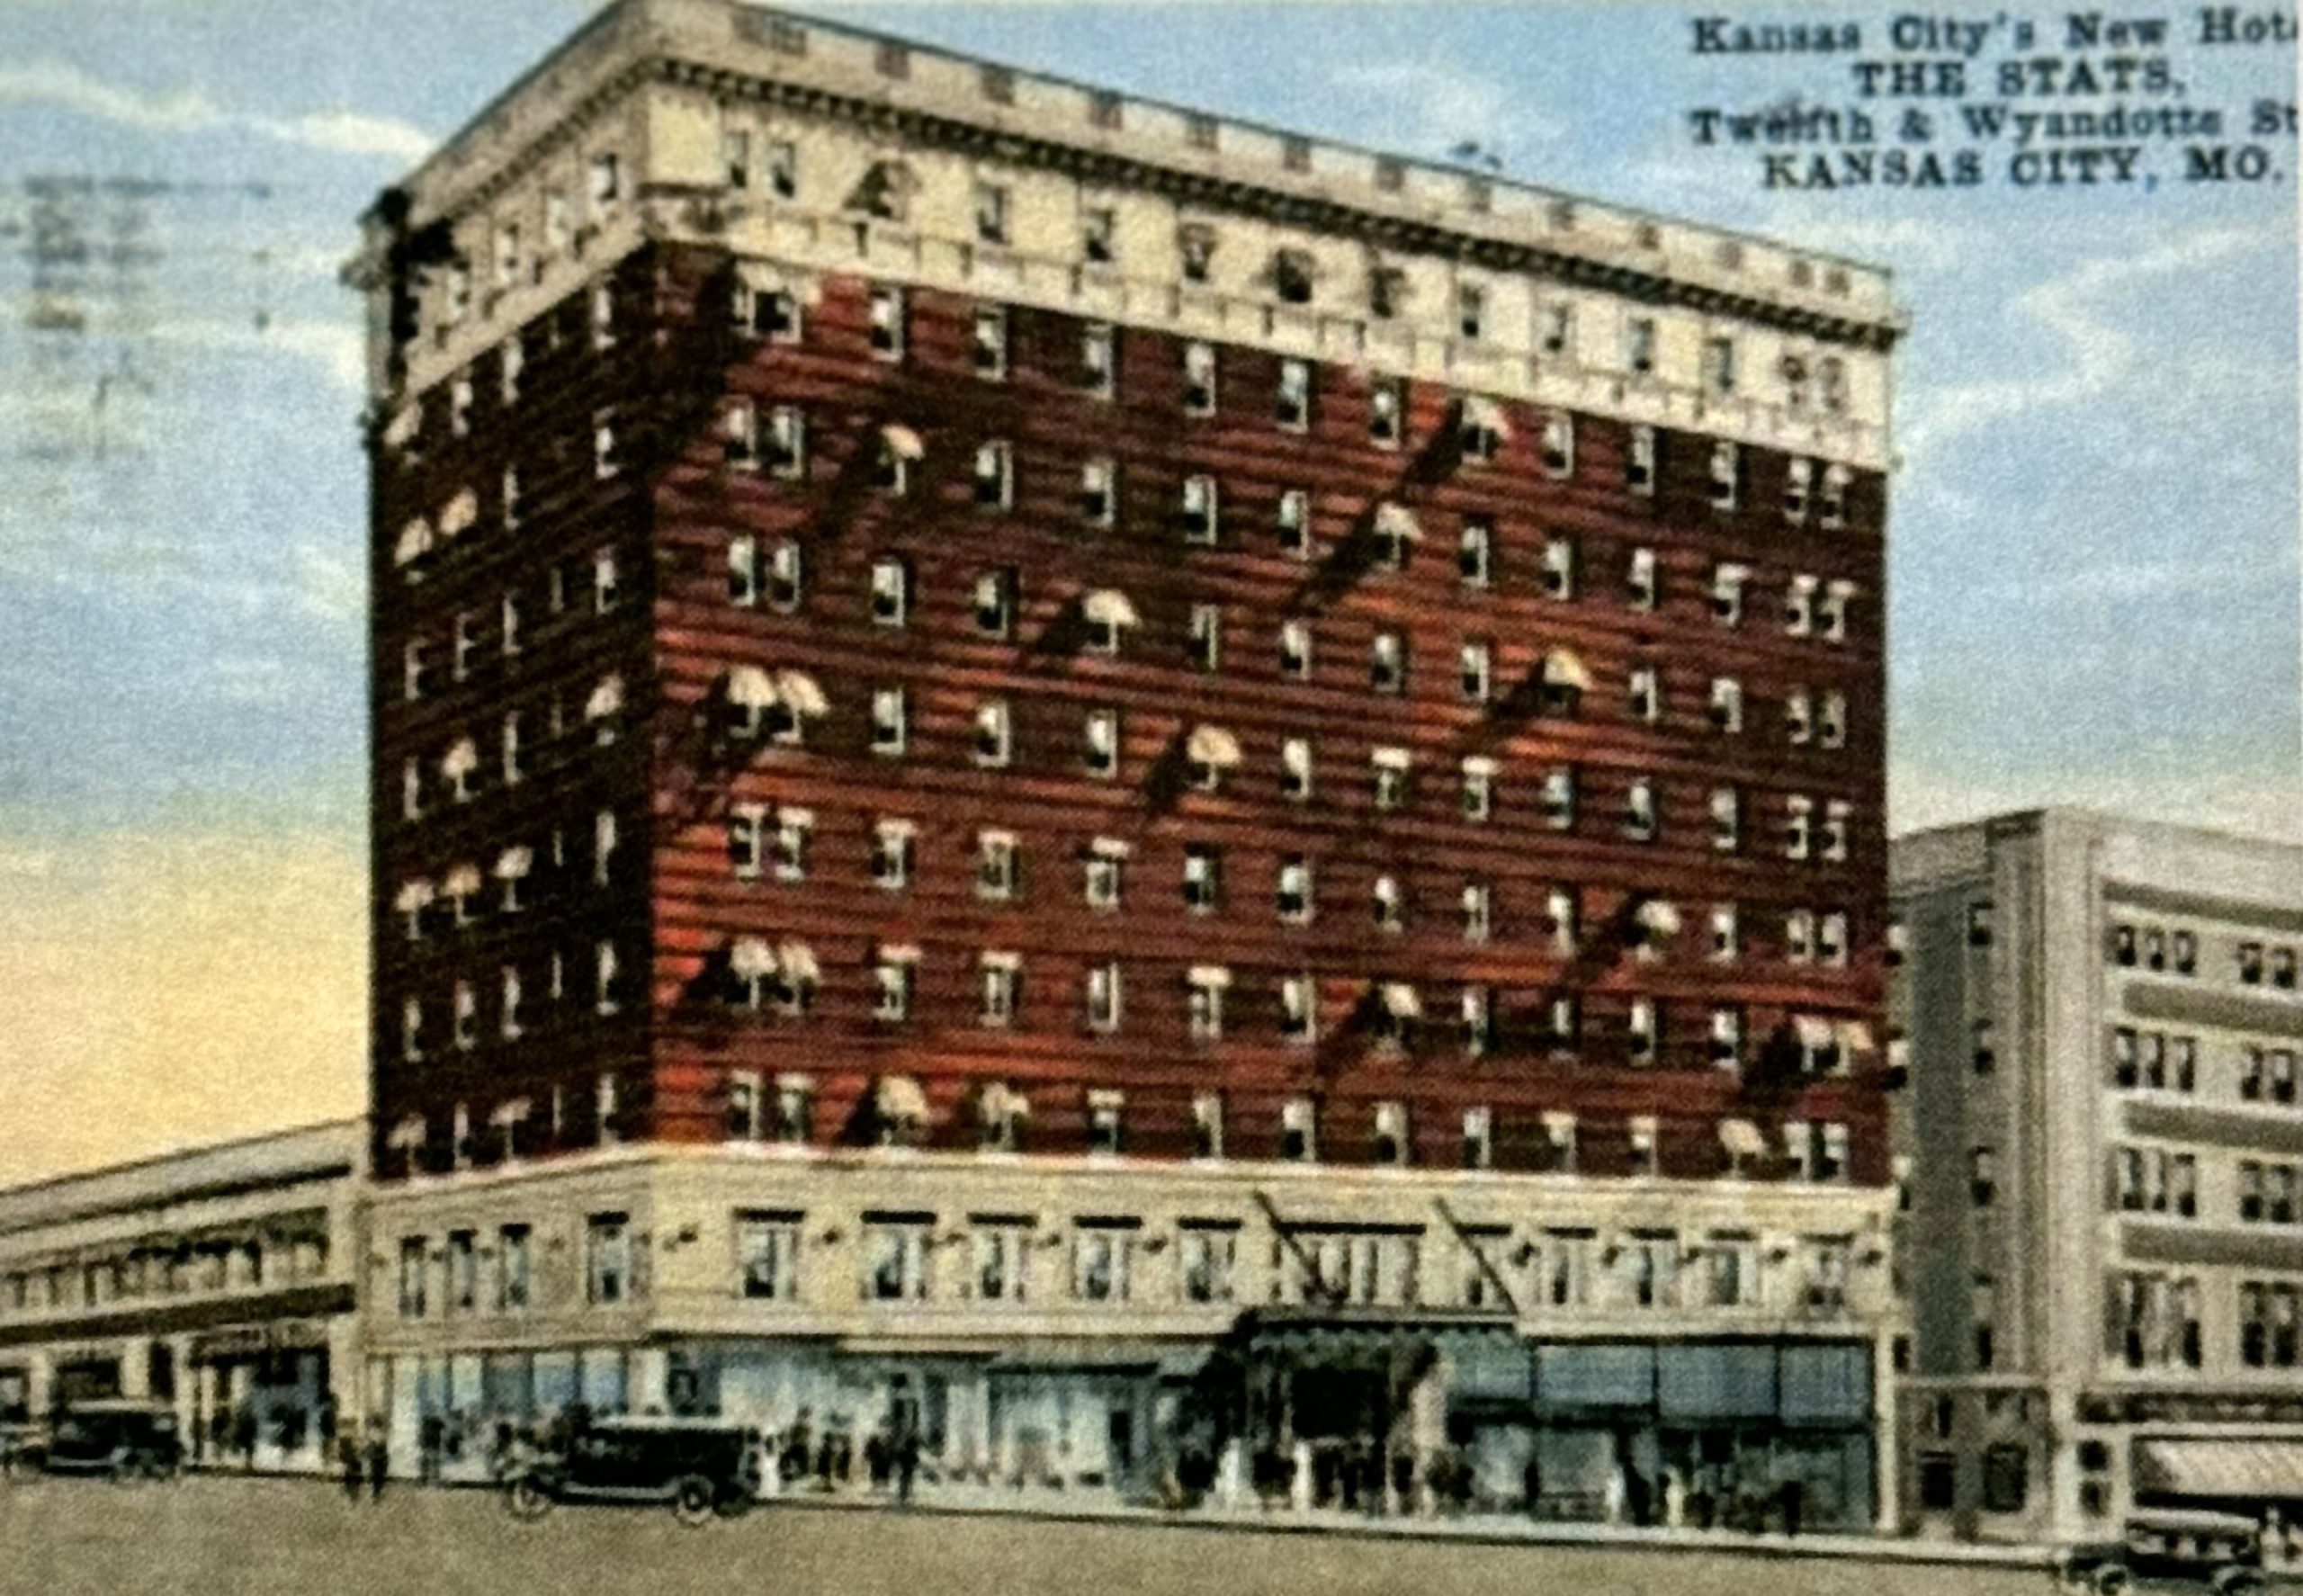 The Stats Hotel: Early Activism in Kansas City